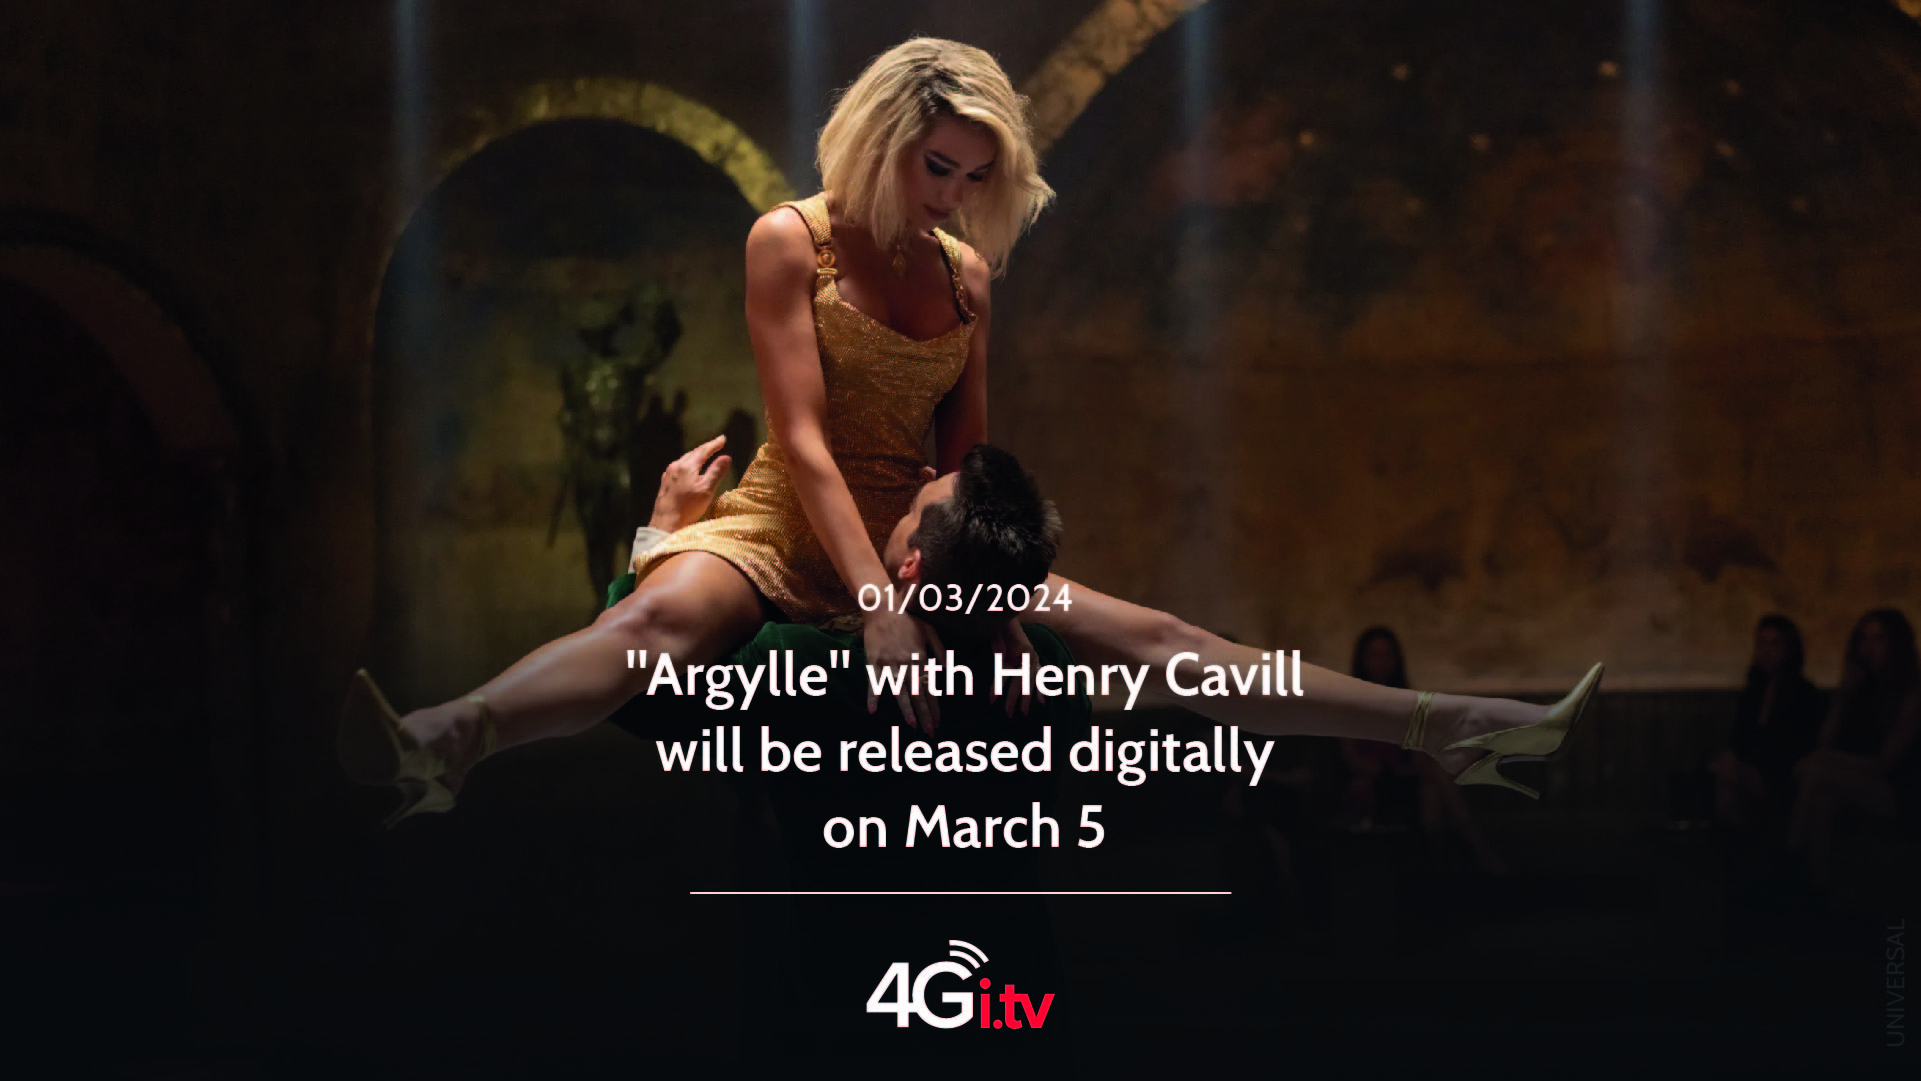 Подробнее о статье “Argylle” with Henry Cavill will be released digitally on March 5